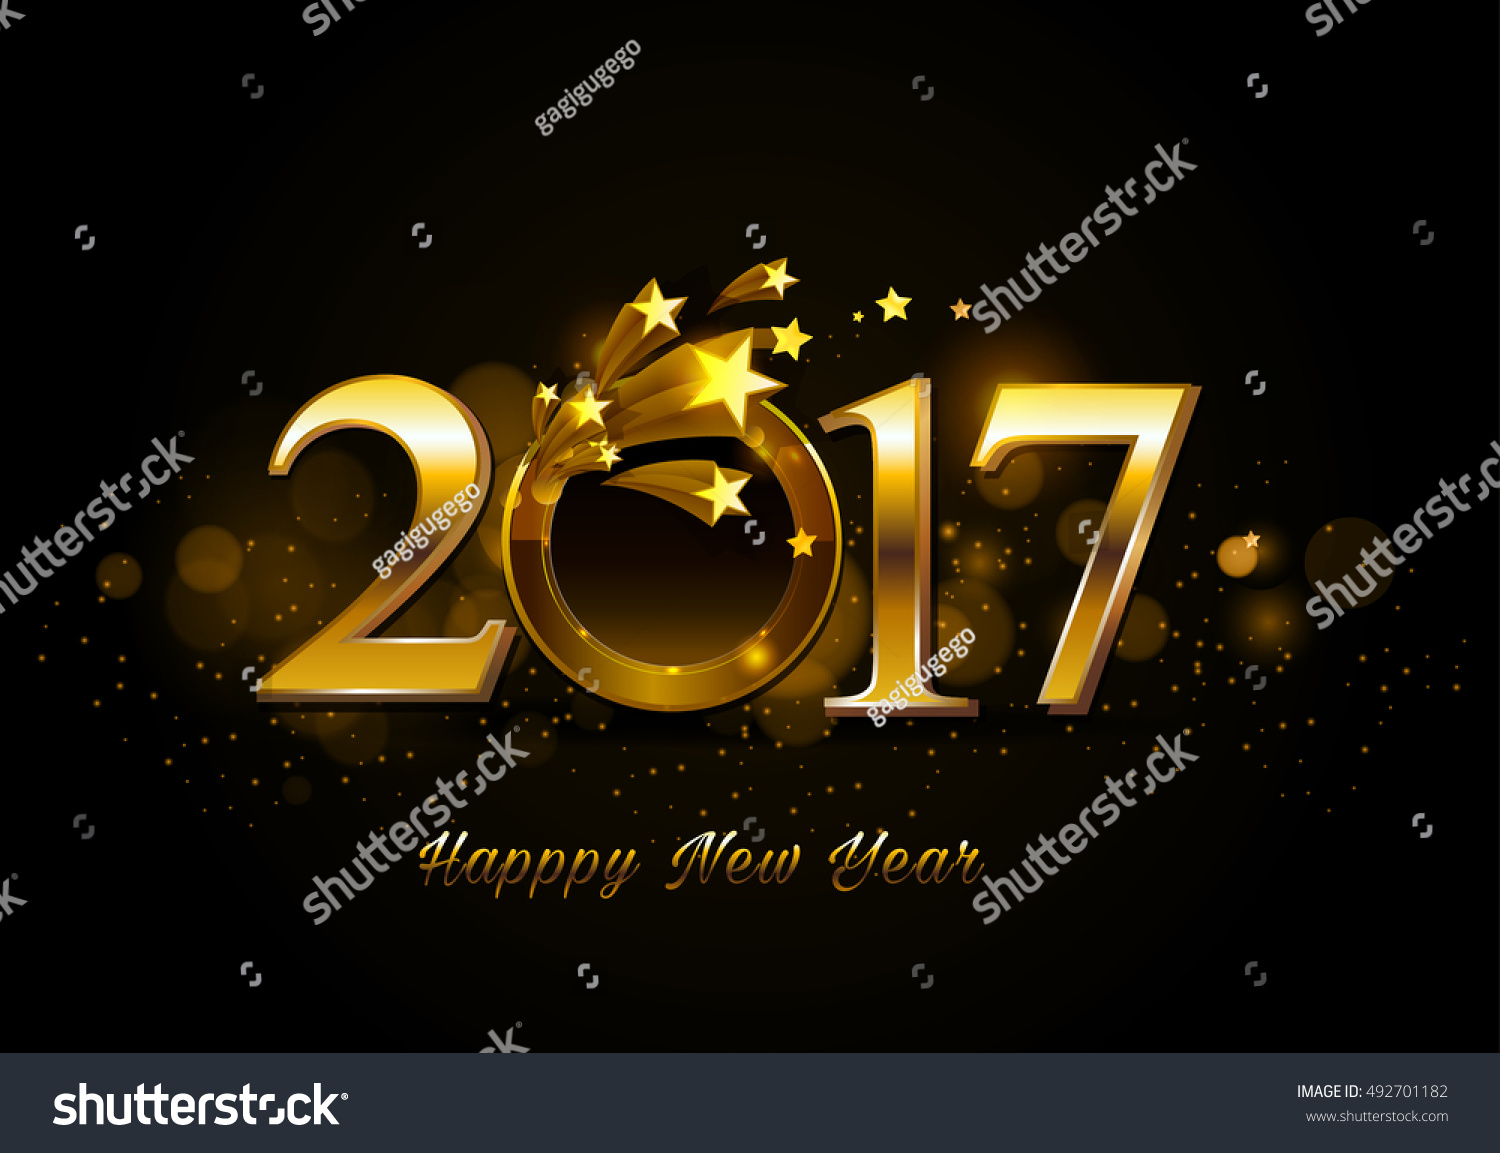 Happy New Year 2017 celebrations greeting card design with golden ring and star background. #492701182